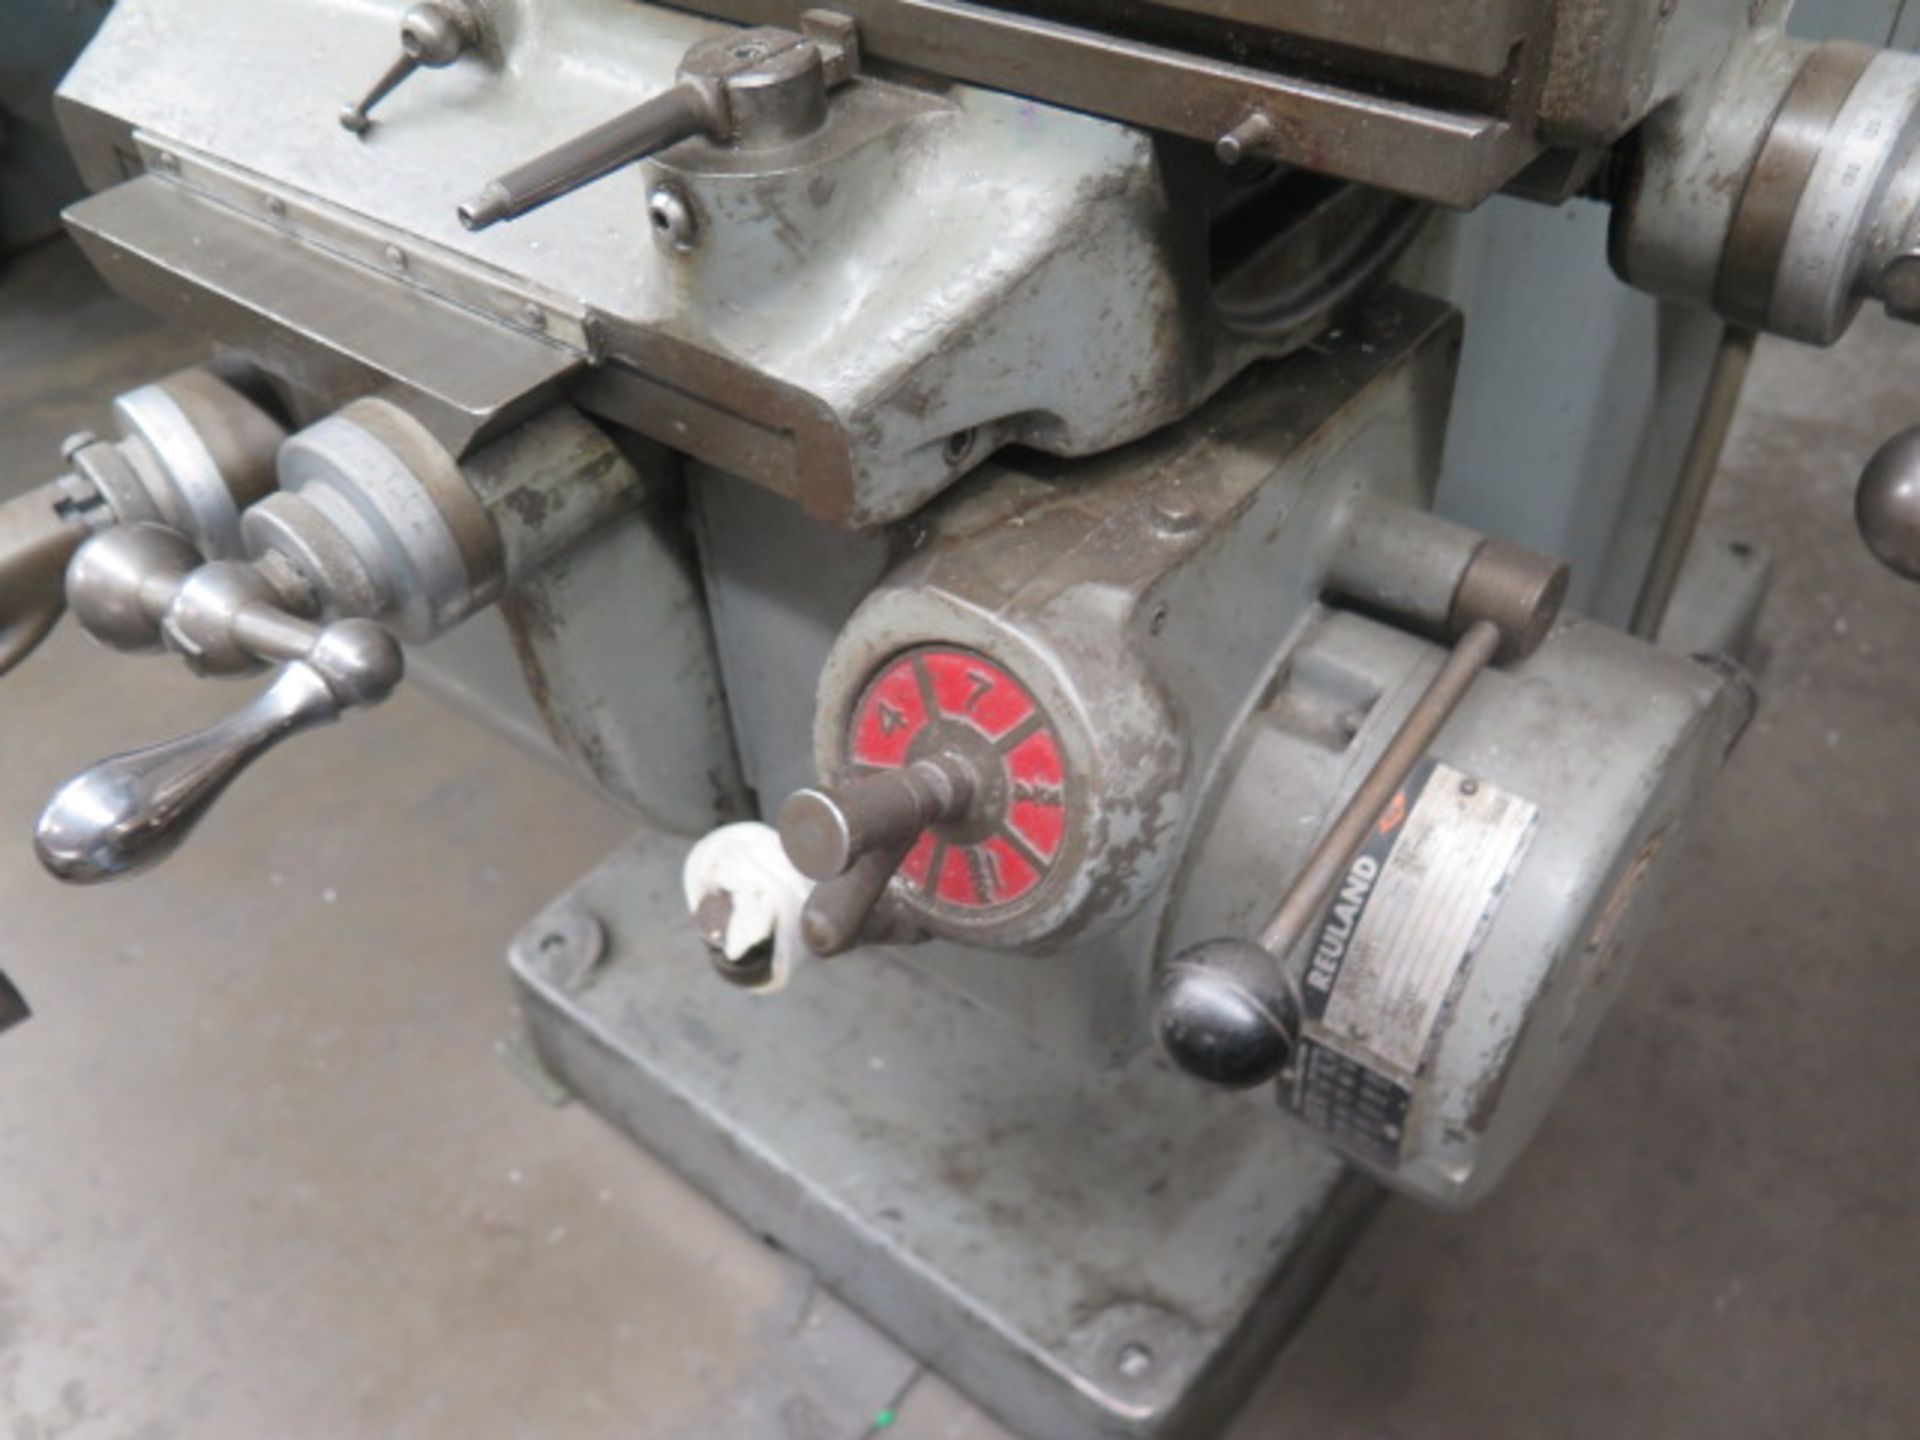 Tree 2UVR Vert Mill w/ 1.5Hp Motor, 60-3300 Dial Change RPM, Colleted Spindle, PF, SOLD AS IS - Image 7 of 8